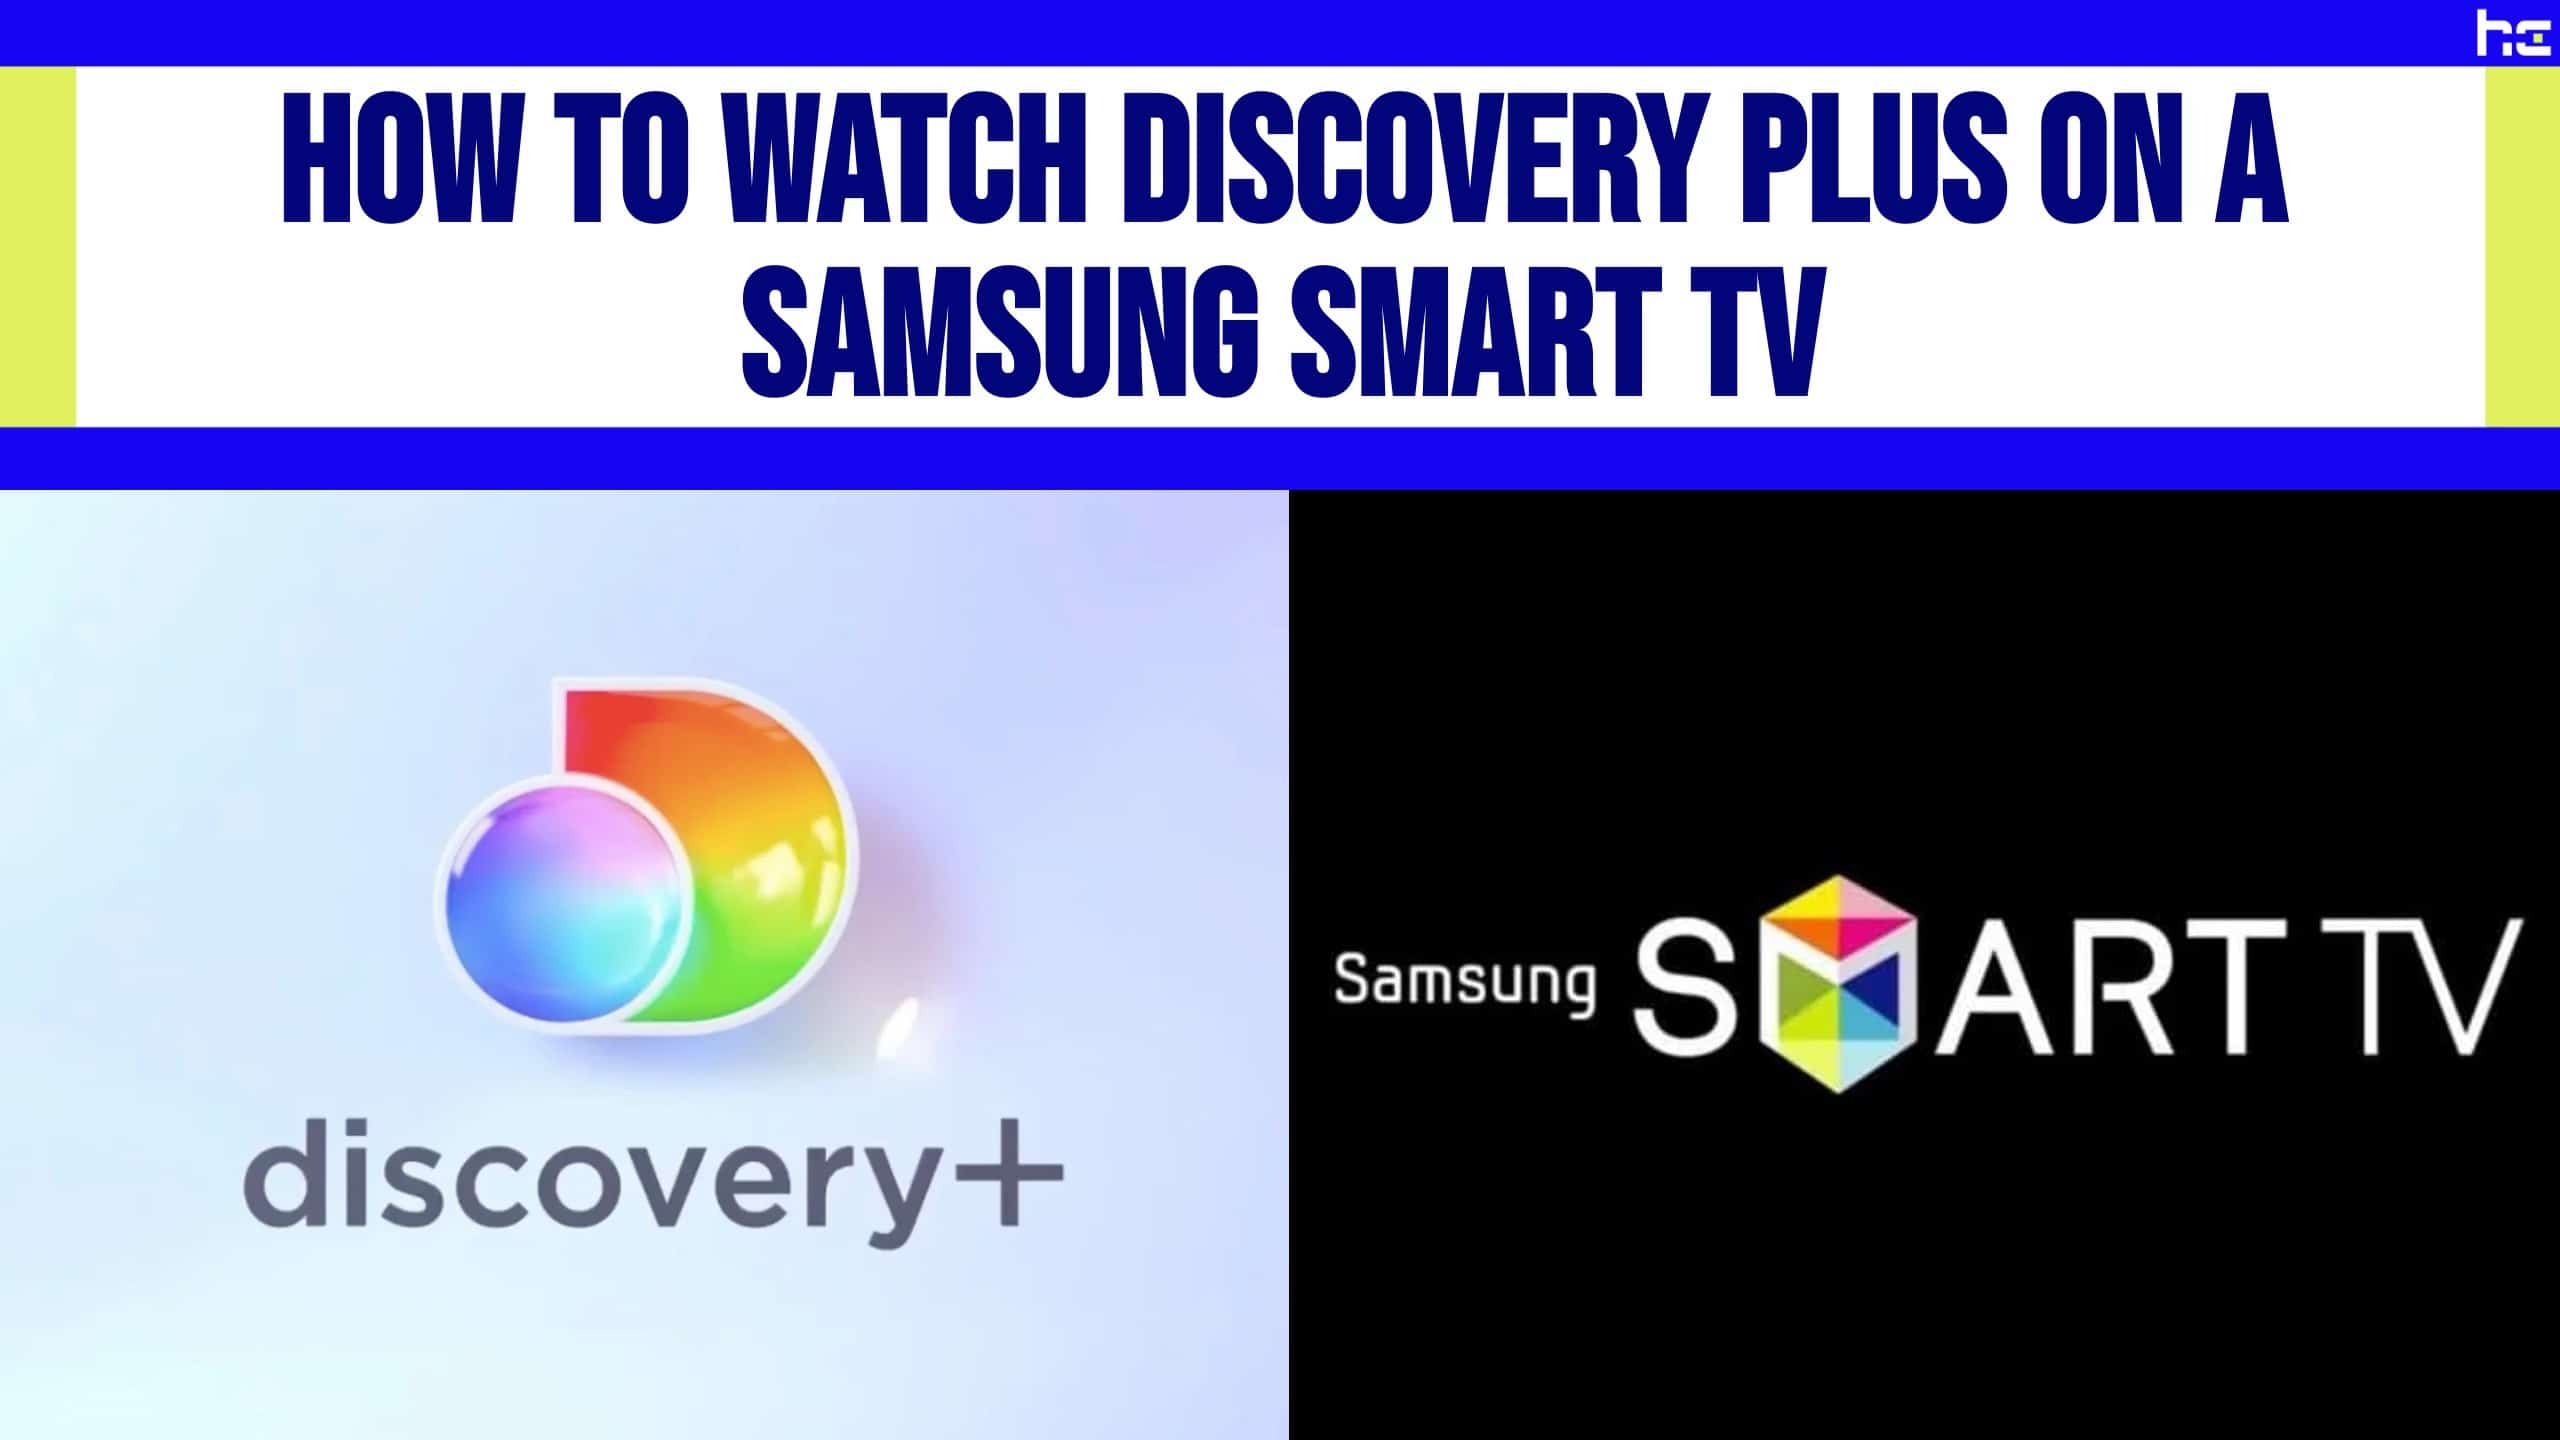 Samsung Gaming Hub, an All-New Game Streaming Discovery Platform